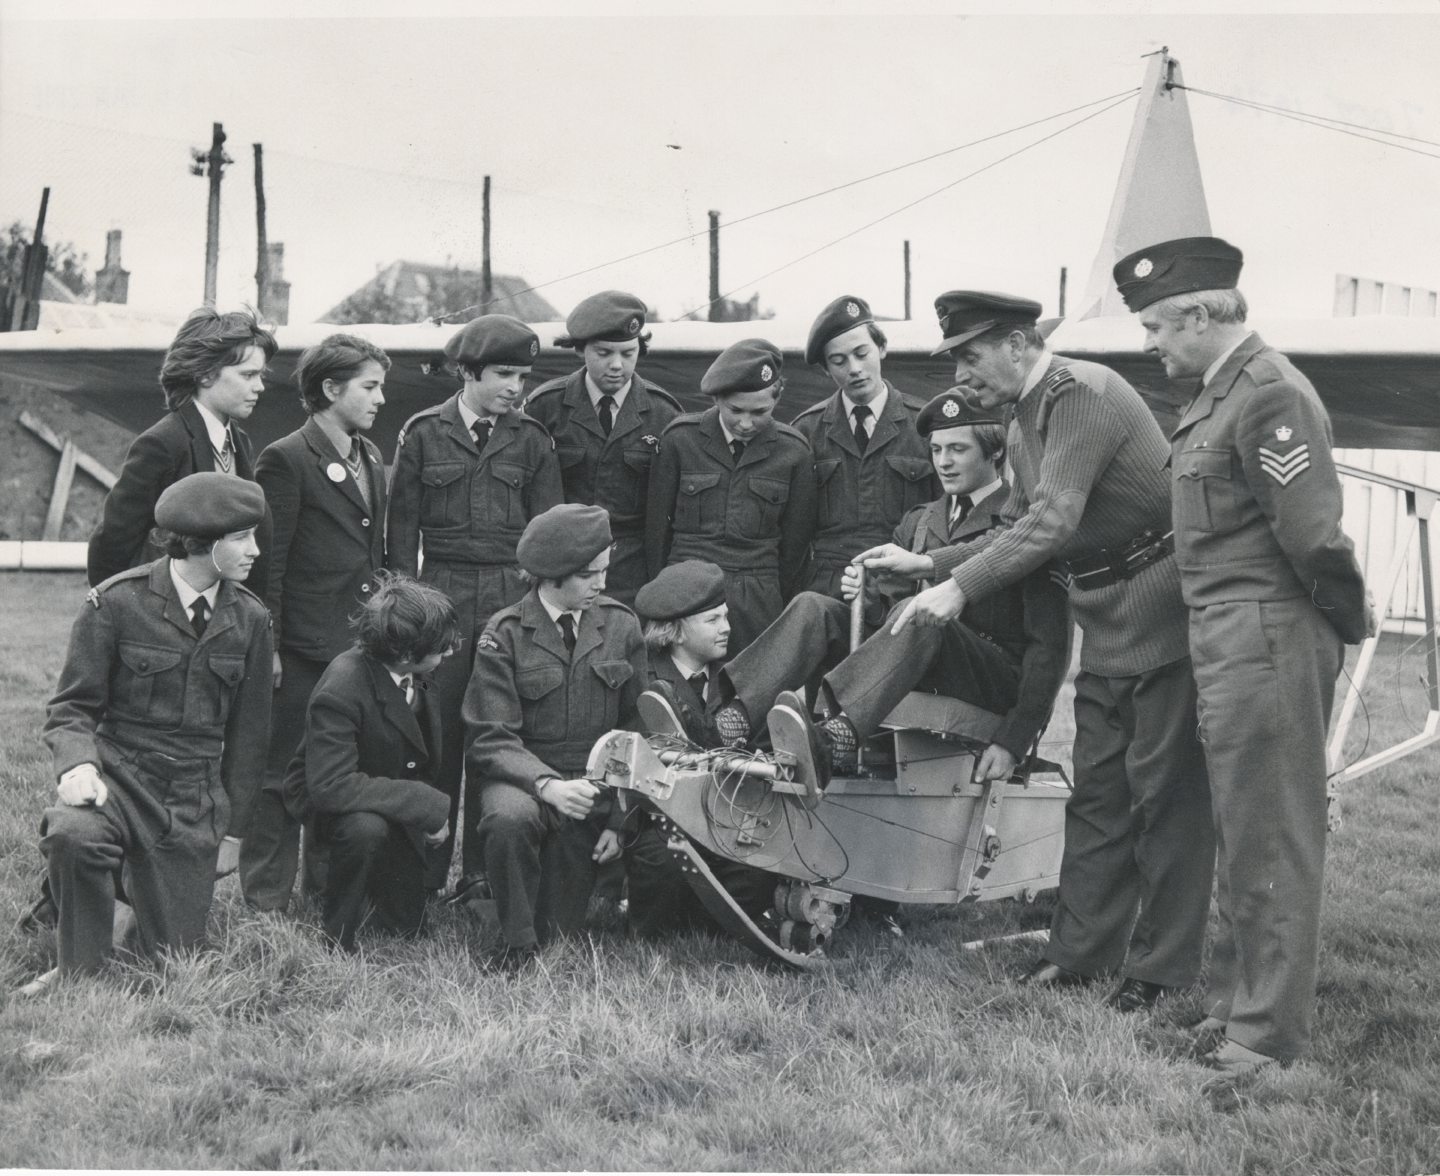 Cadets of Rubislaw Academy (Aberdeen Grammar School) pictured having fun with a glider in the summer of 1974.